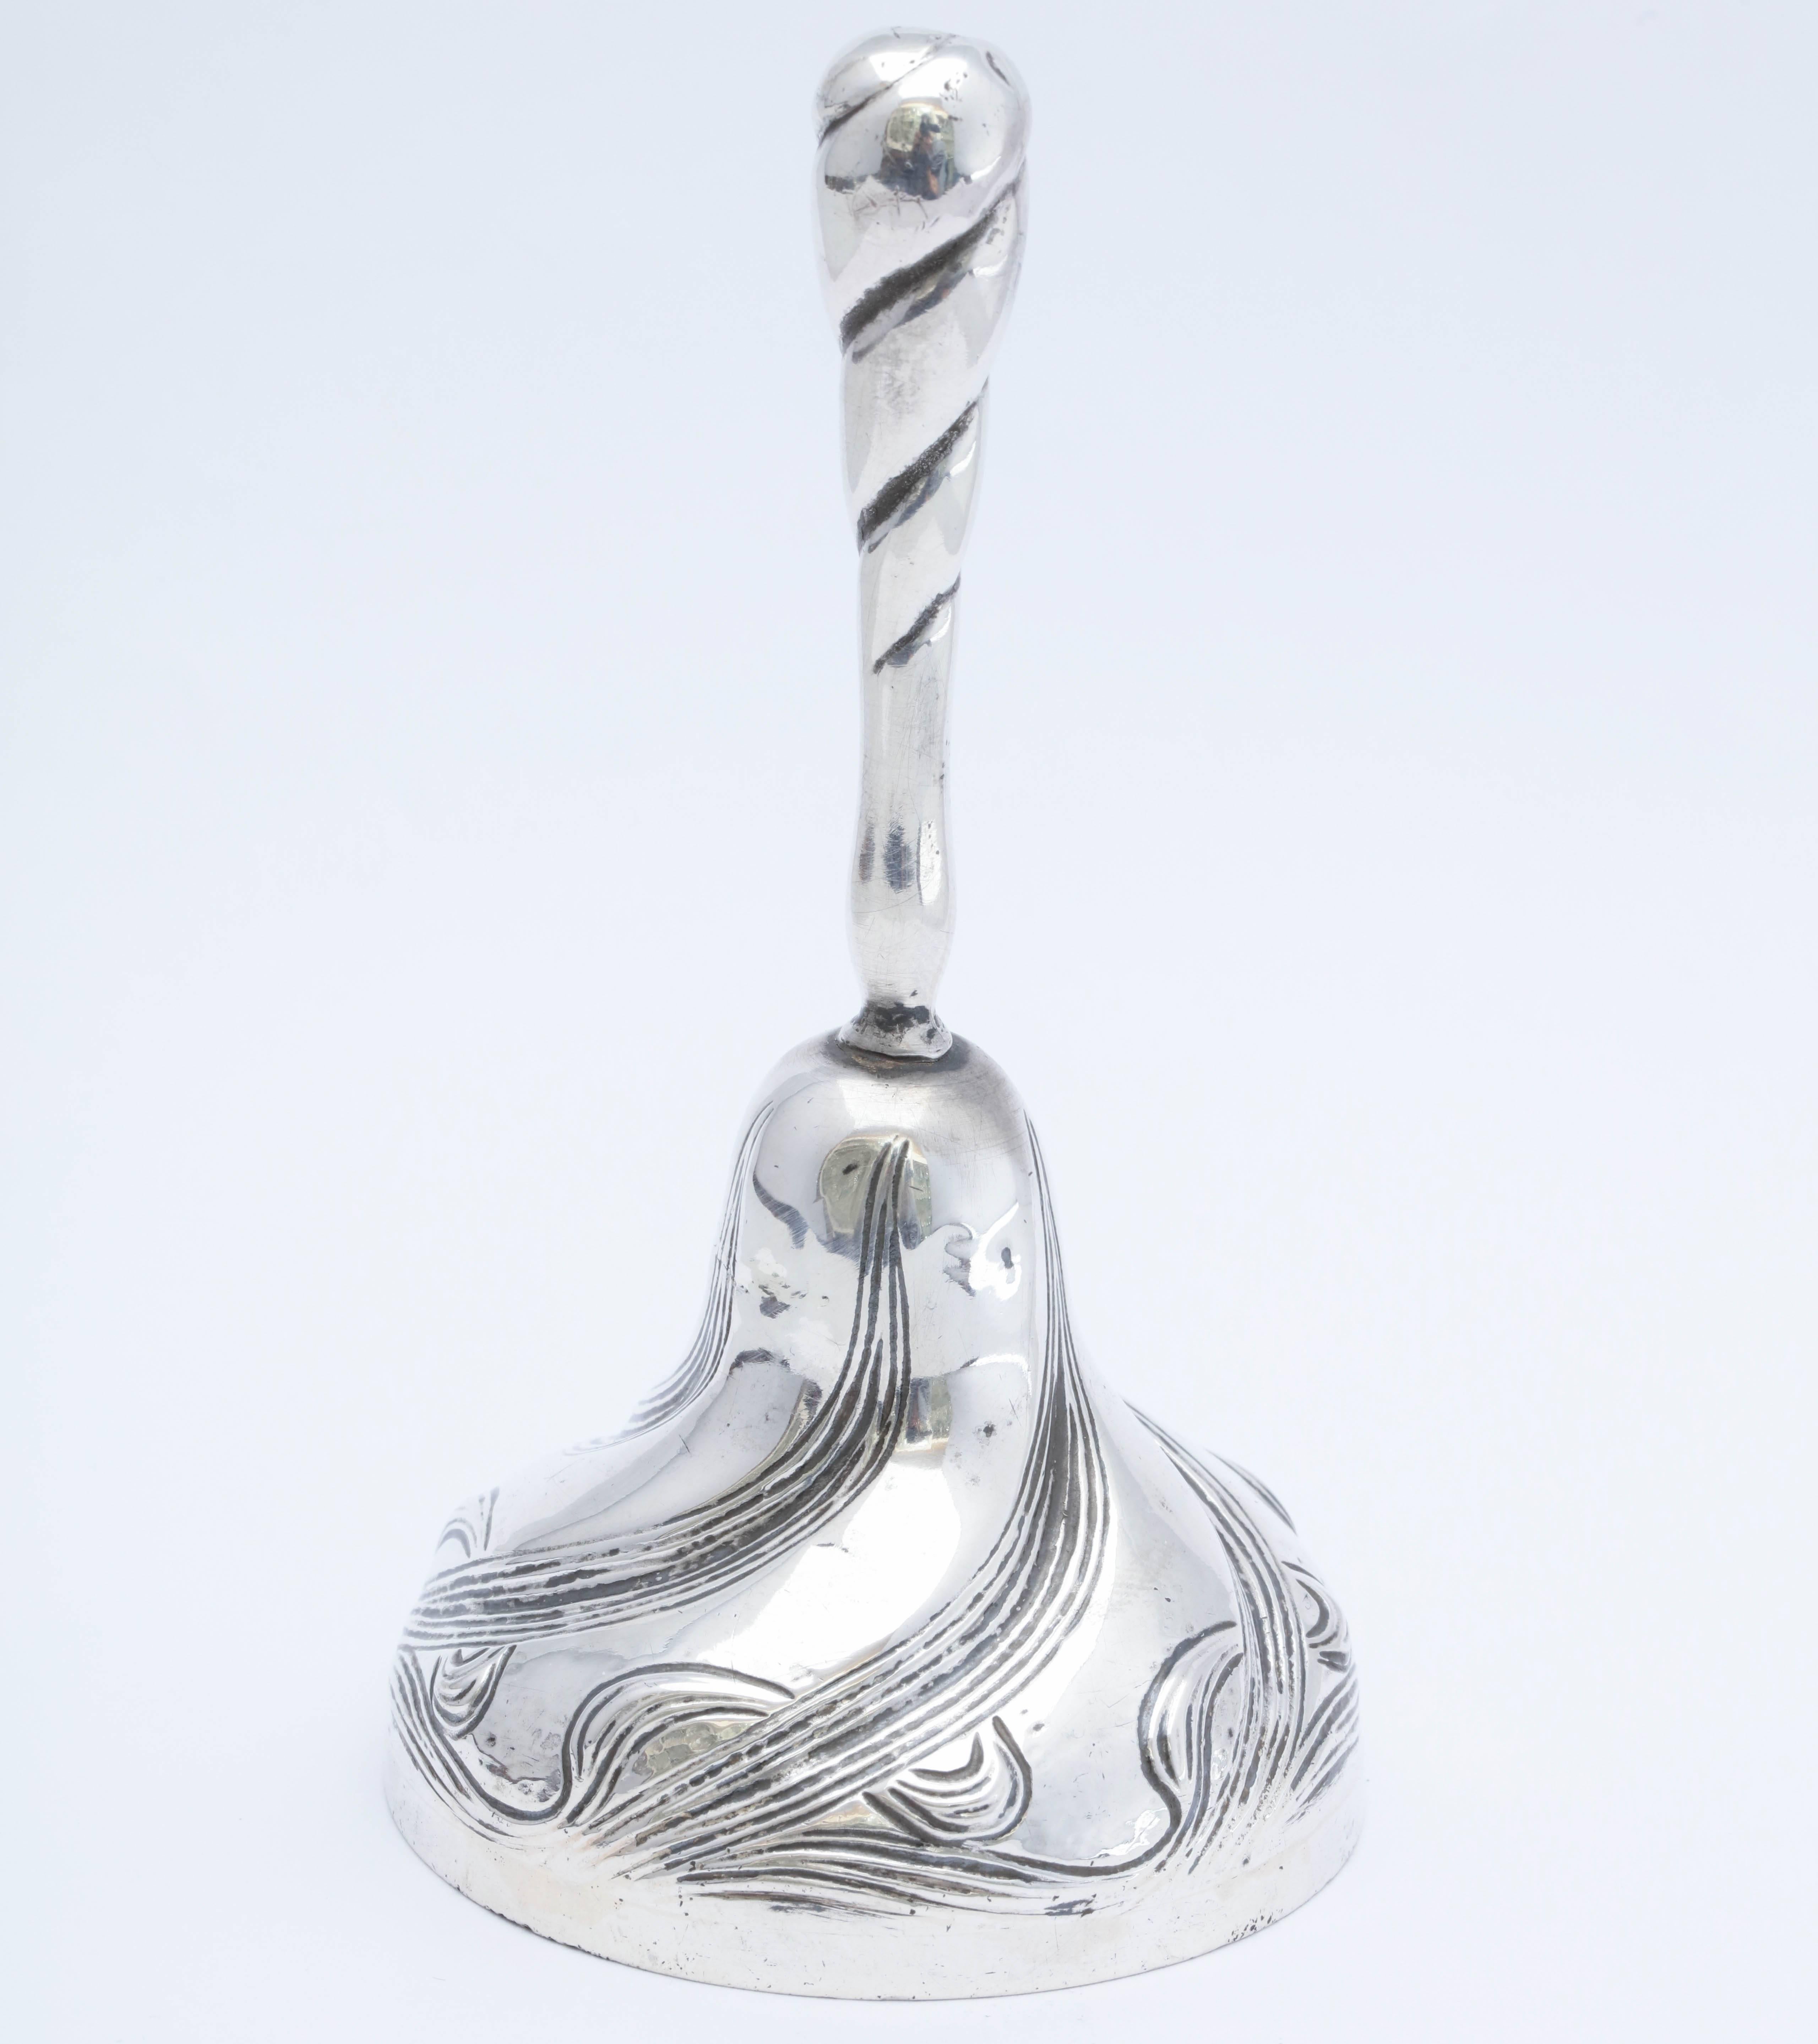 Rare, Art Nouveau, all sterling silver (including clapper) bell, William B. Kerr and Co., New Jersey, Ca. 1895-1908. Decorated with graceful flowers stems that whip around the bell. Measures 5 inches high (to top of handle) x 2 1/2 inches in